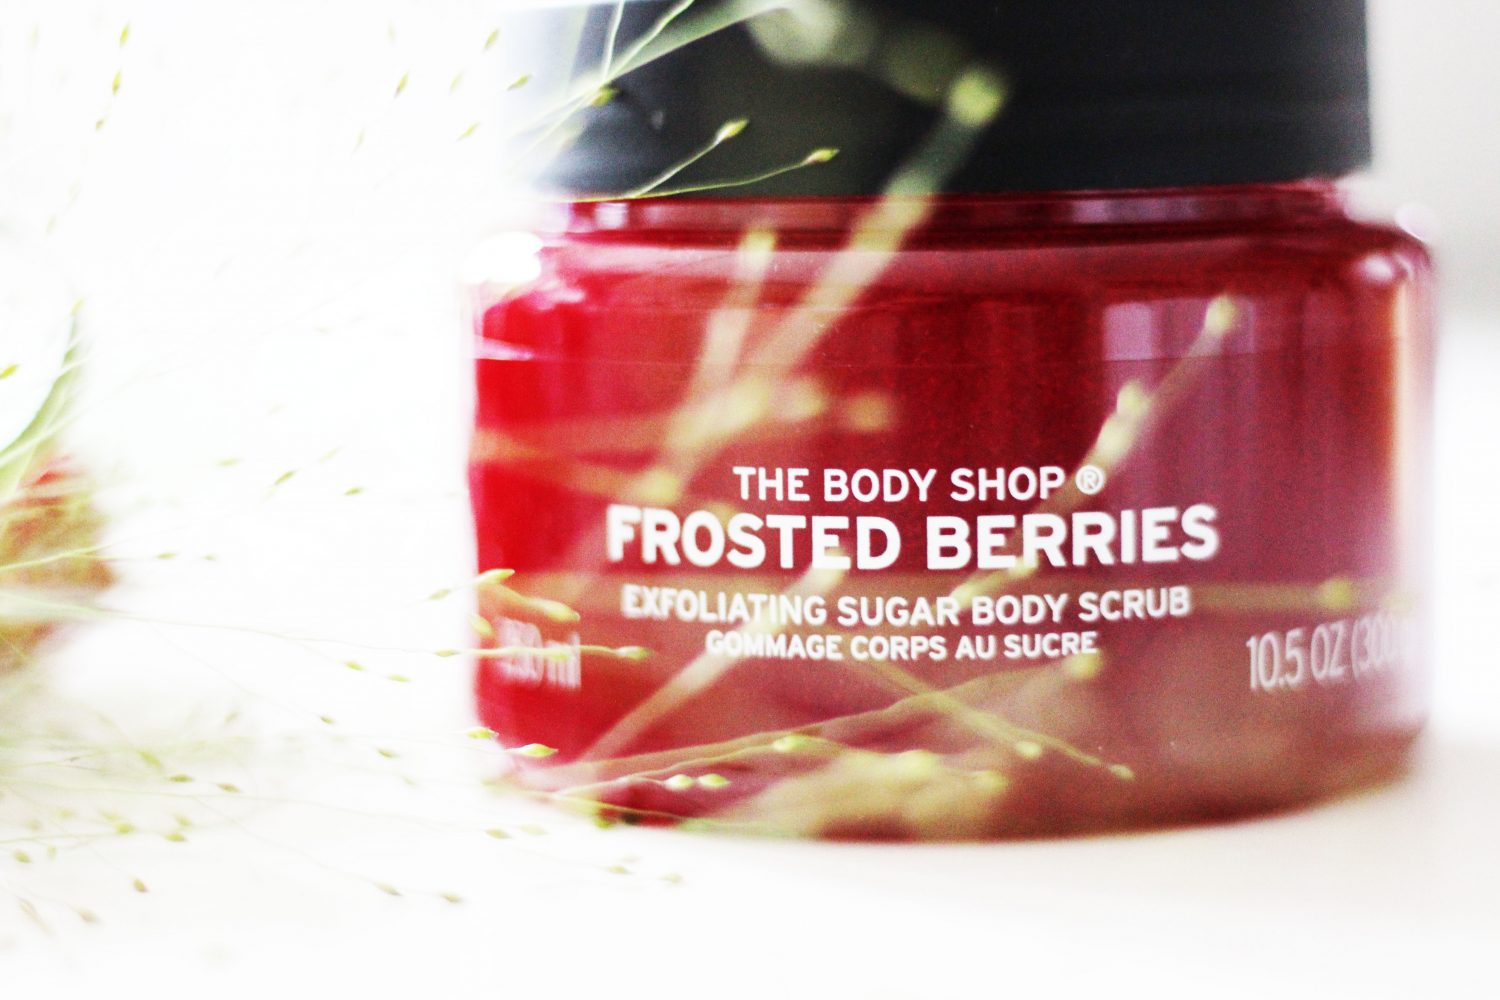 The Body Shop Frosted Berries